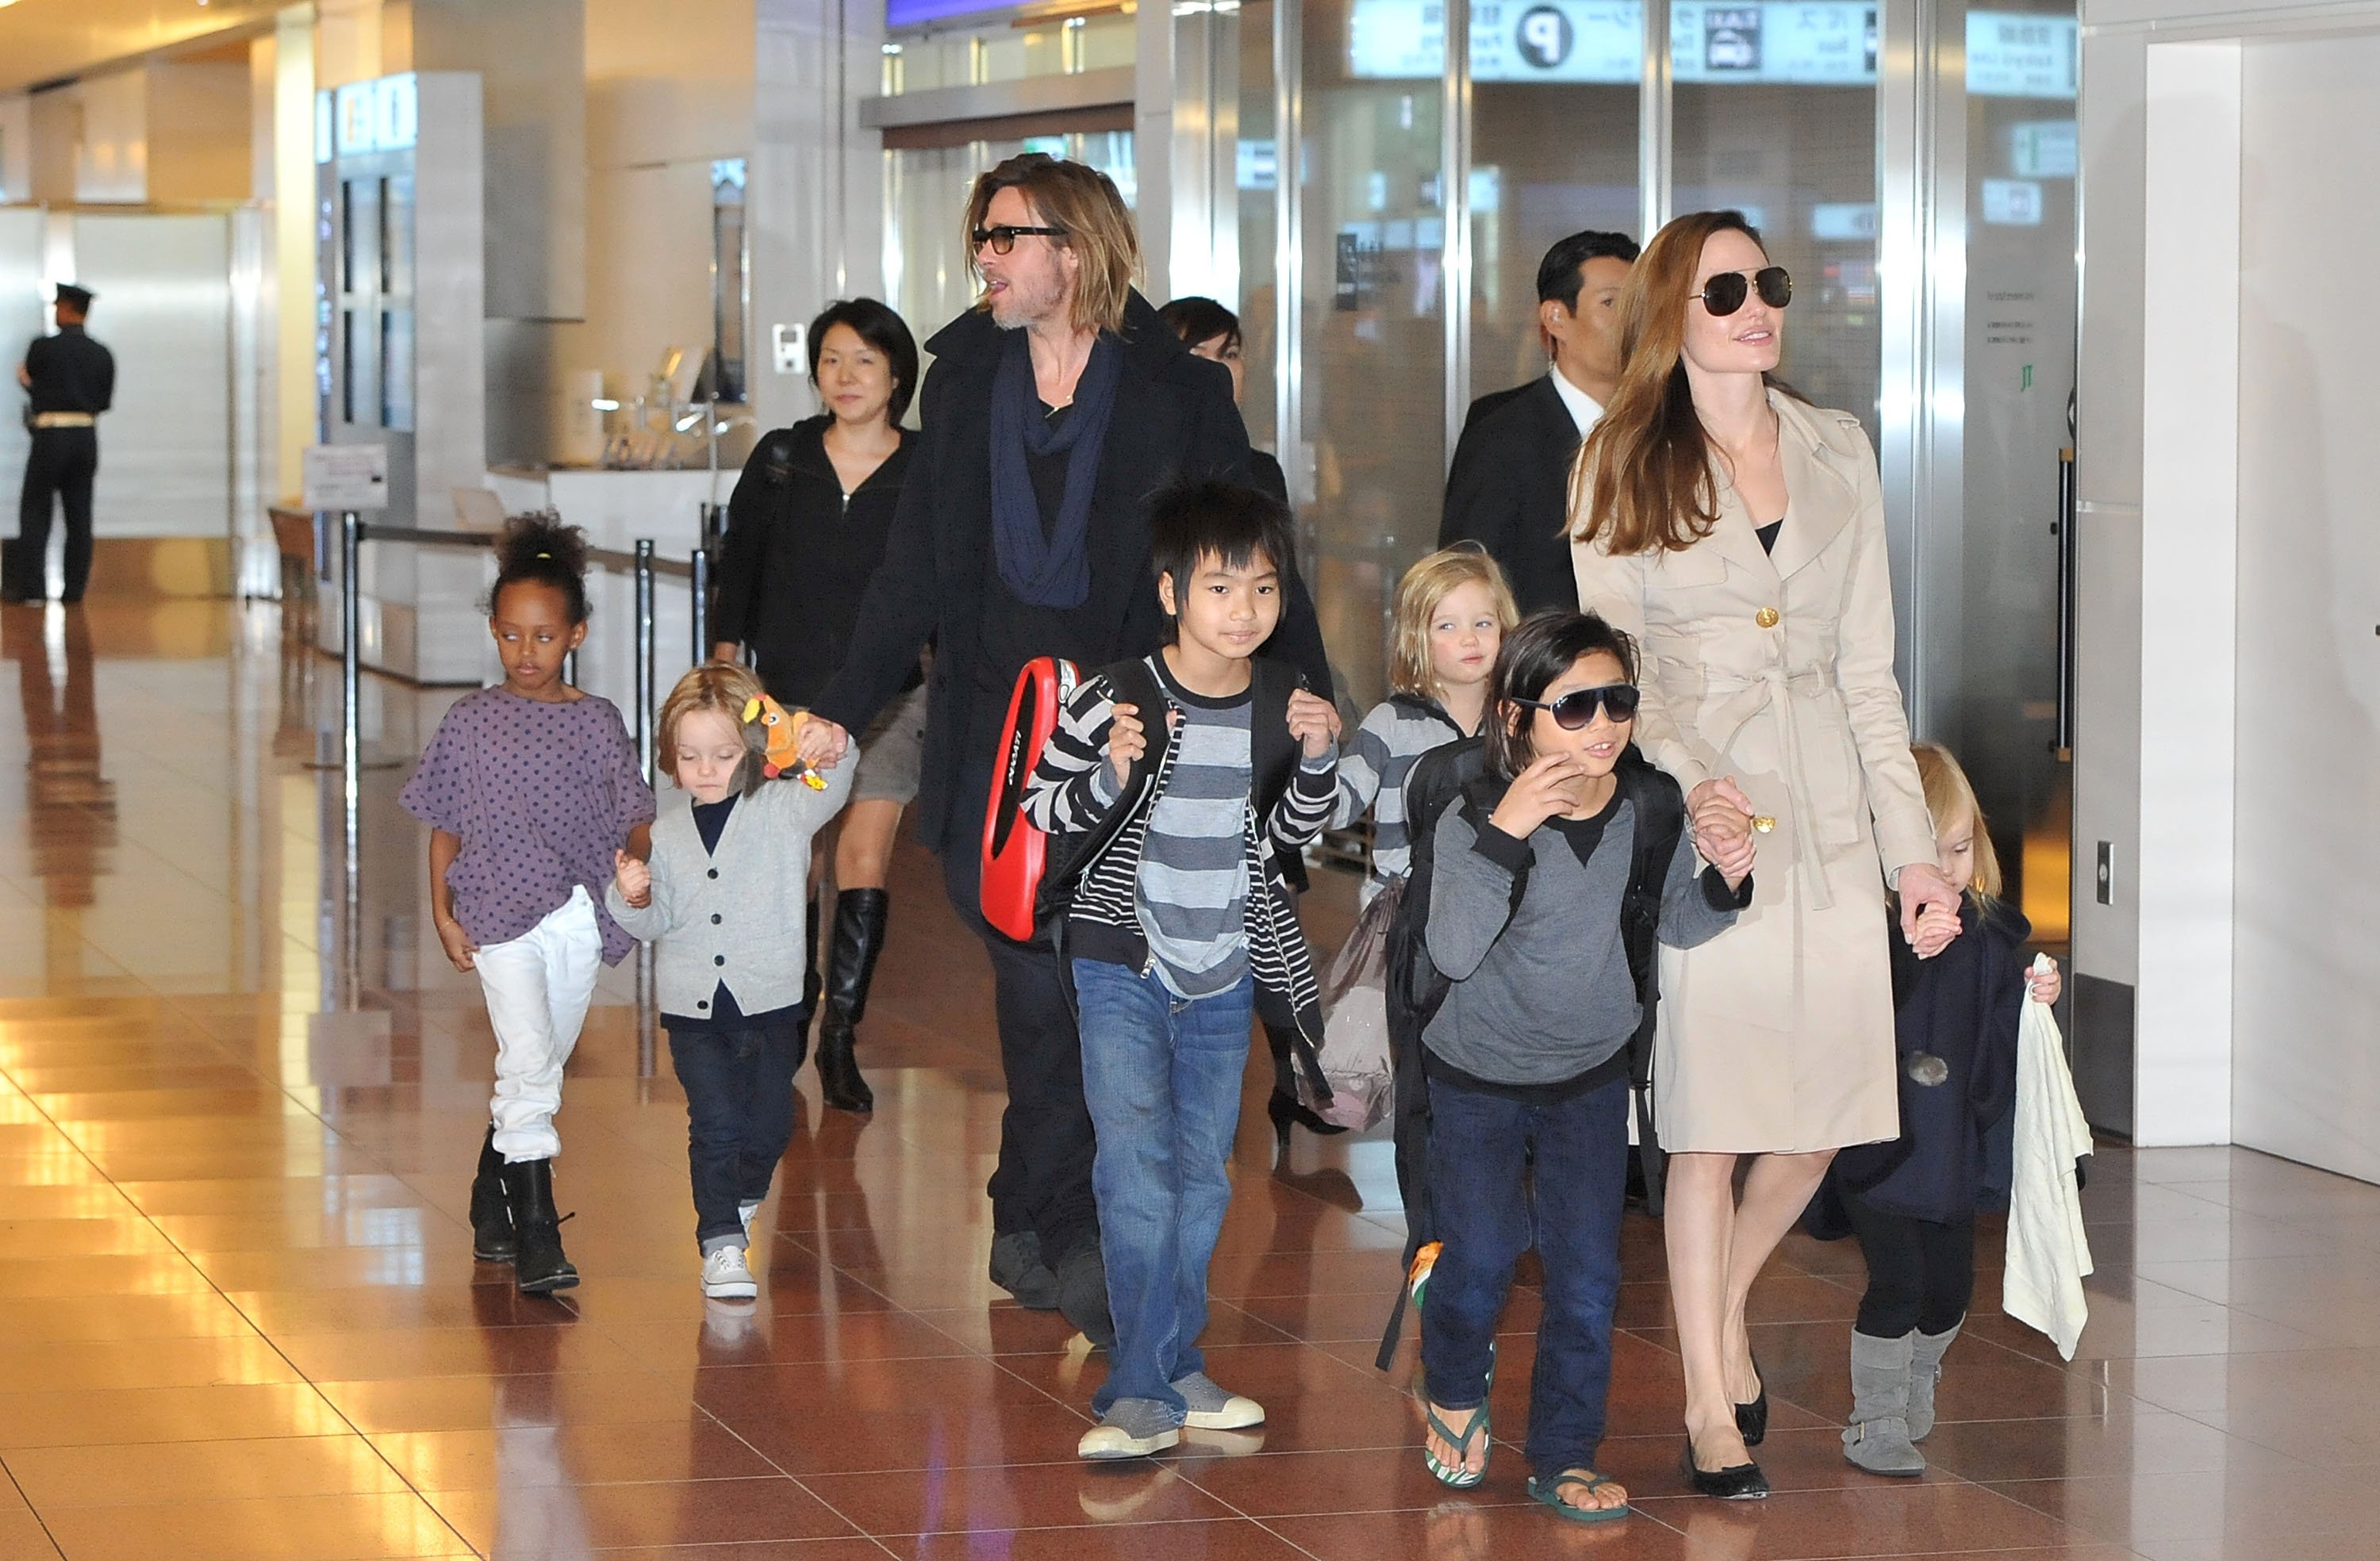 Brad Pitt, Angelina Jolie and their six children Maddox, Pax, Zahara, Shiloh, Knox, and Vivienne arrive at Haneda International Airport on November 8, 2011, in Tokyo, Japan. | Source: Getty Images.